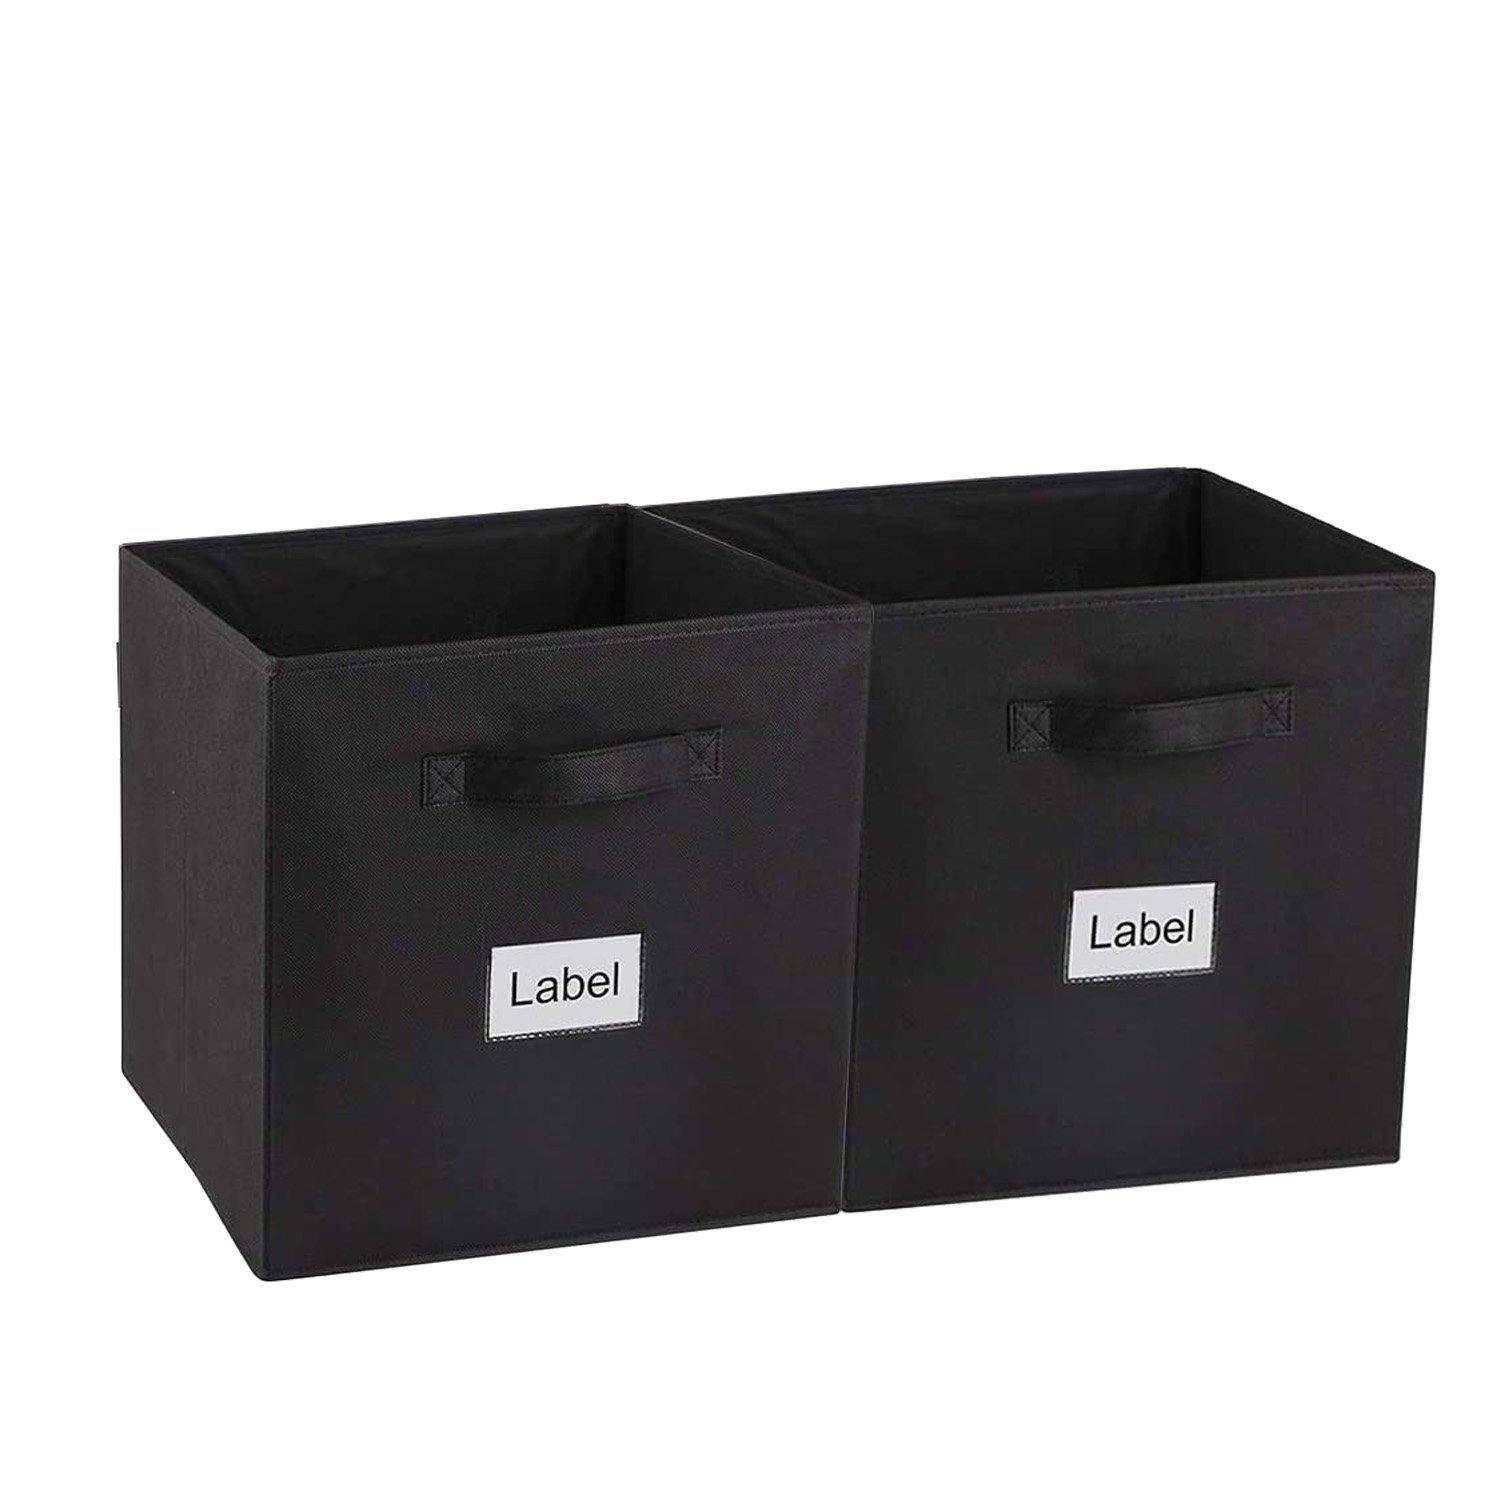 Double R Bags Storage Cubes Non-woven Fabric Storage Bins | Cube Storage Bins for Home and Office Medium Black Pack Of 2 - Double R Bags